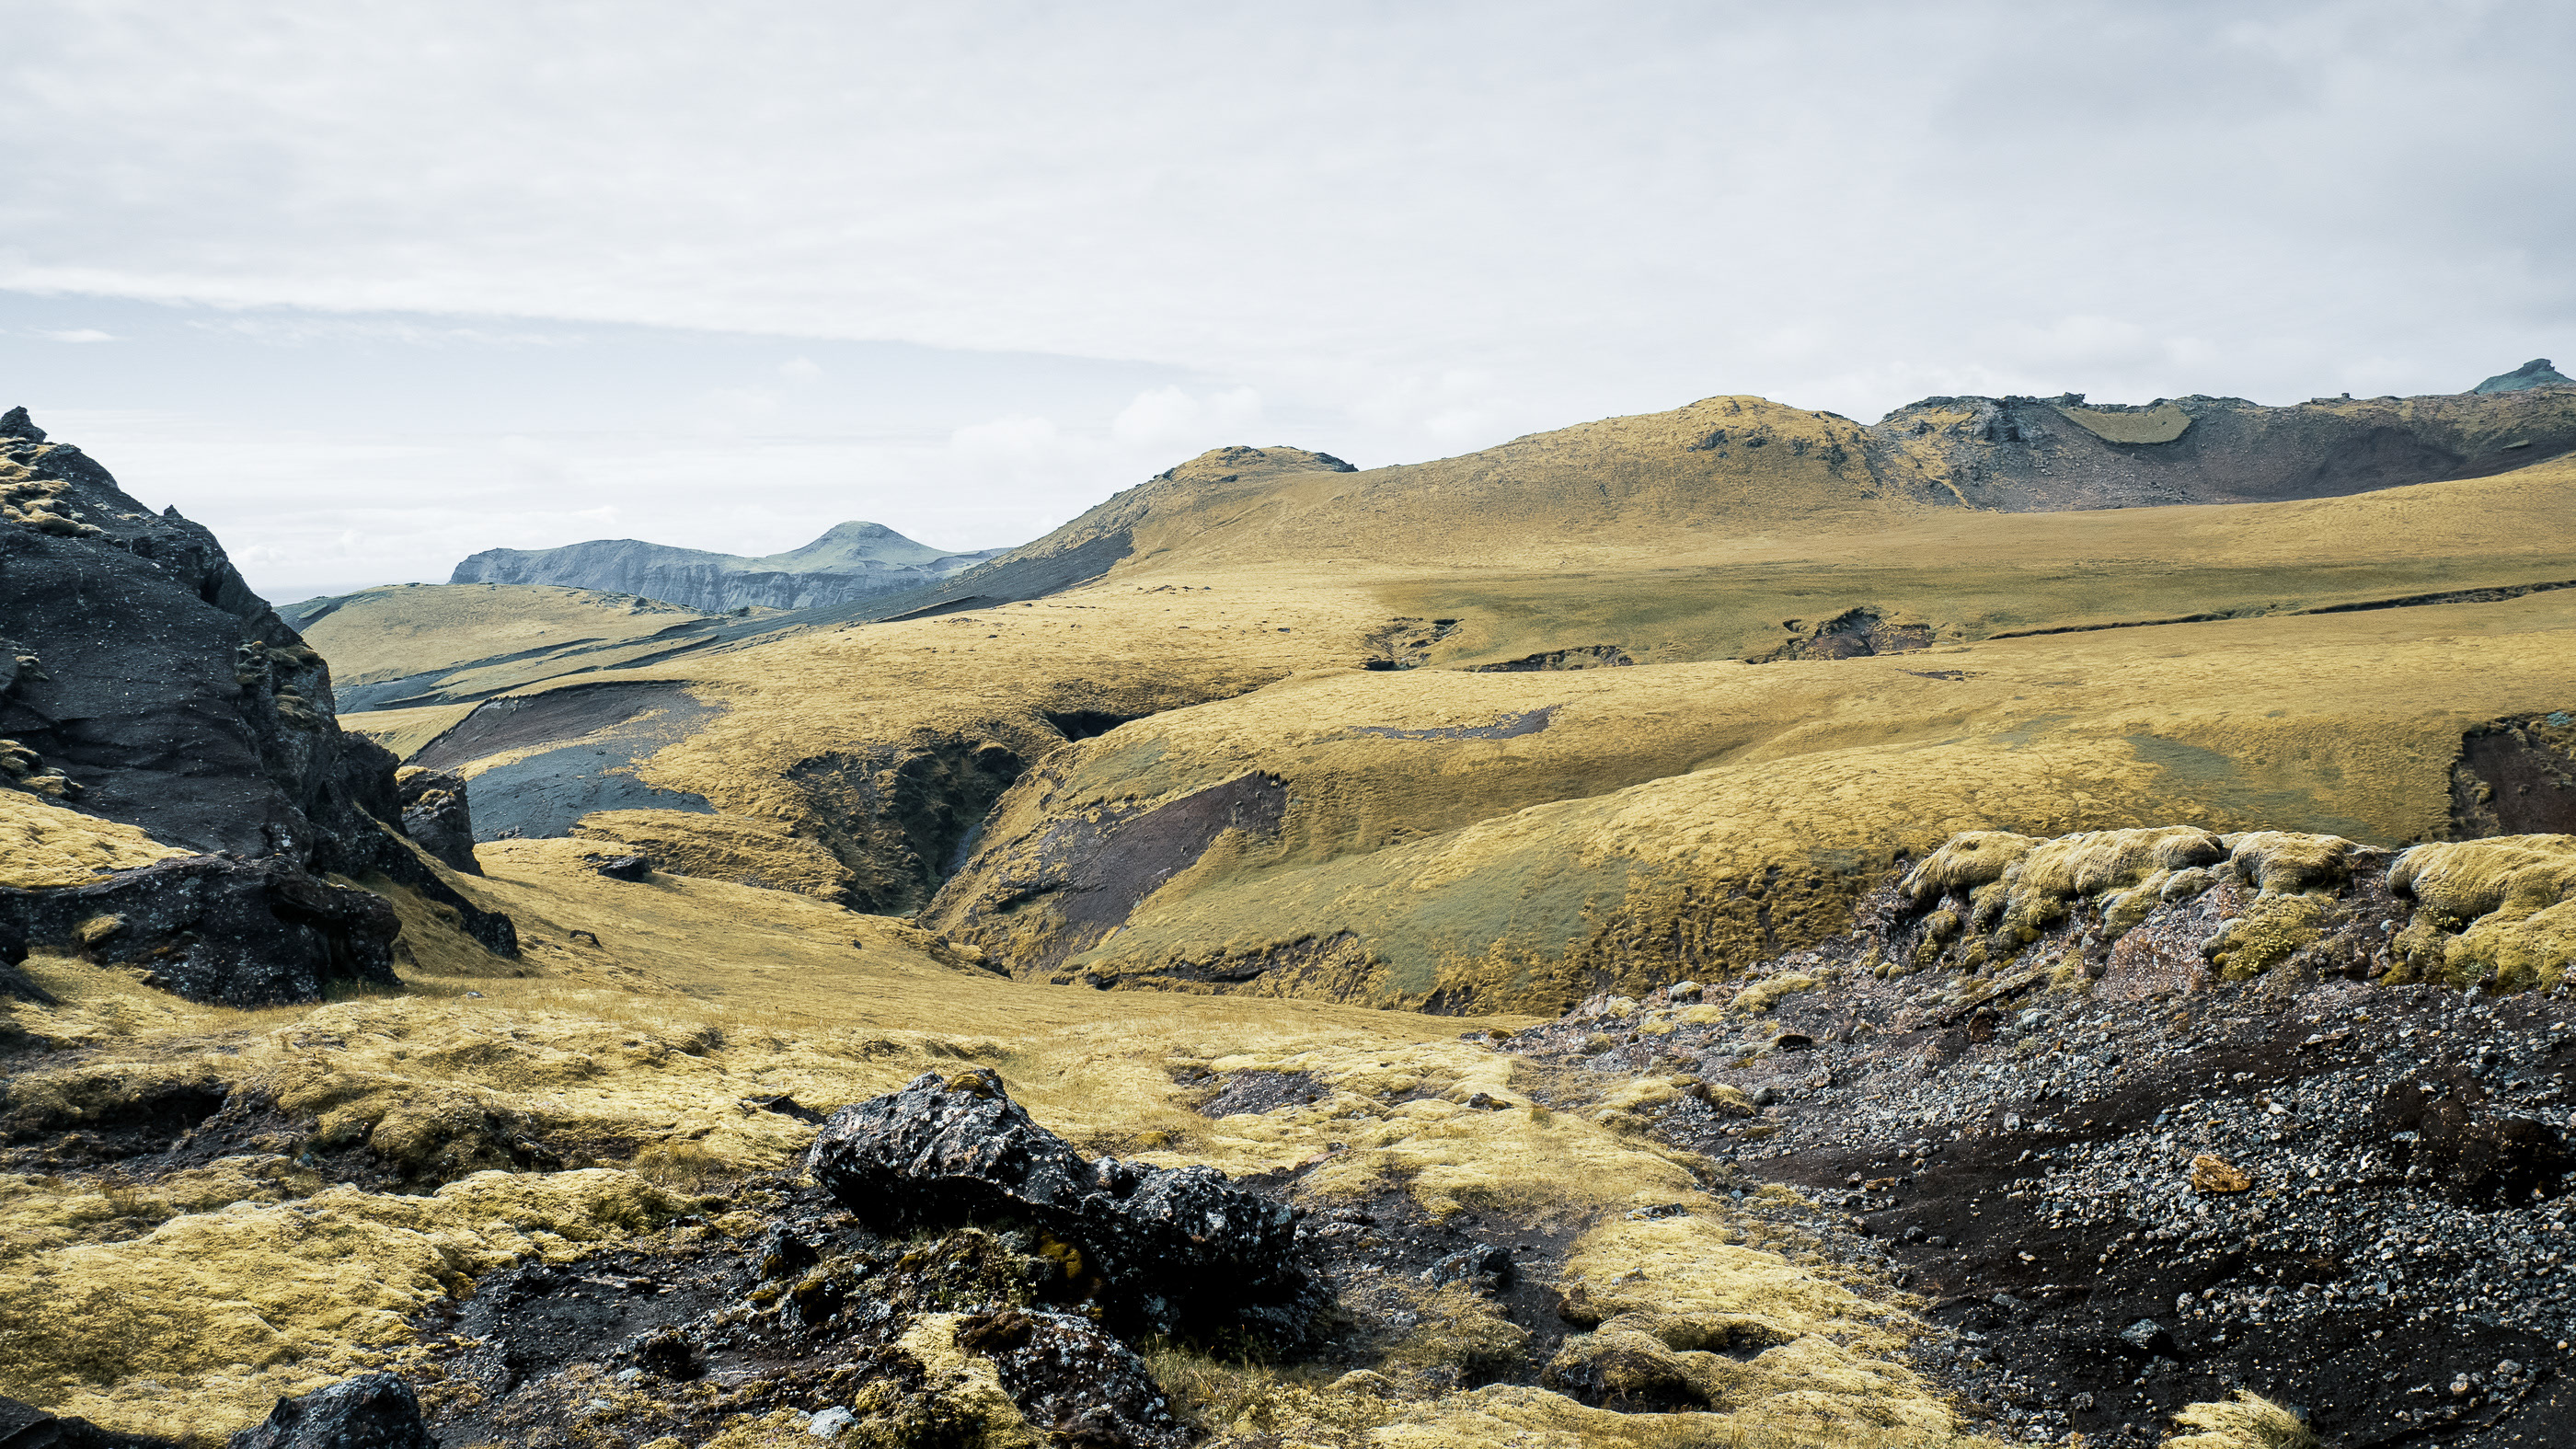 General 2800x1575 photography landscape nature mountains rock formation sky Iceland field Behance hills